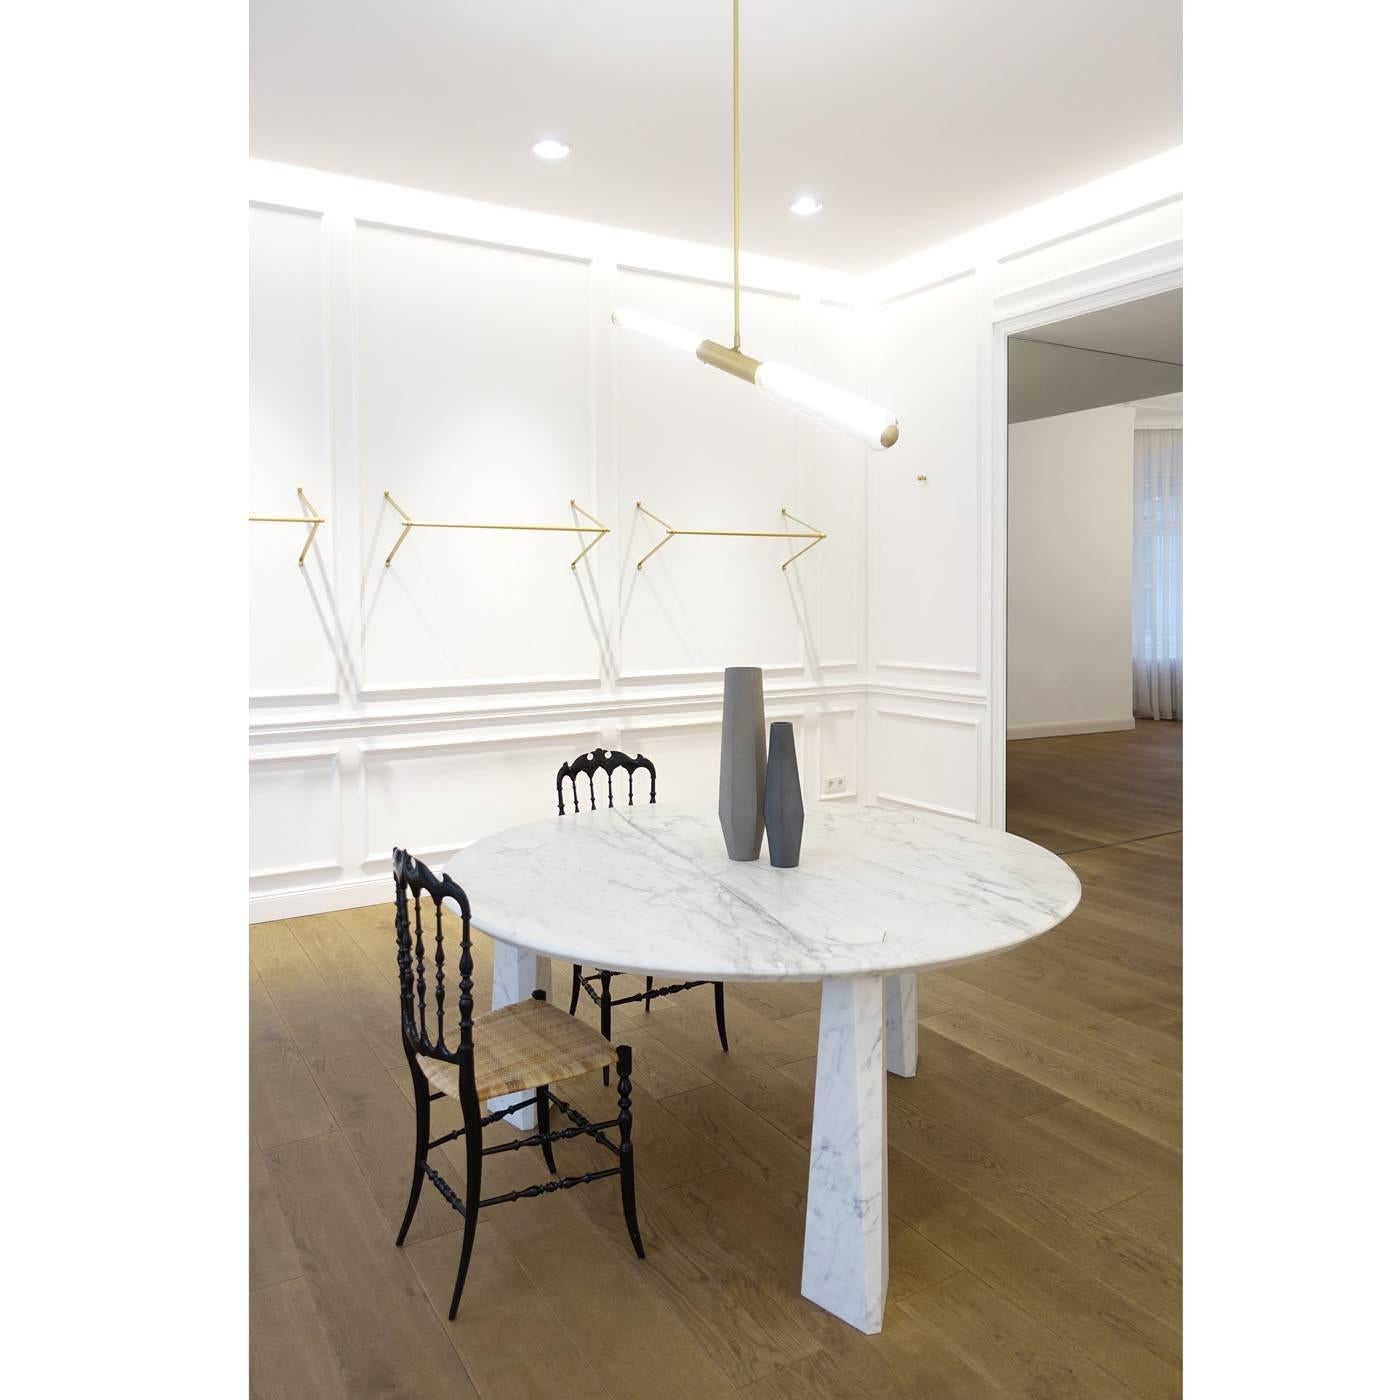 This superb dining table for six people features only three legs. It is executed entirely in white Carrara marble with a 4cm. thick top plate. The M series features a hexagonal sloping joint without the use of glue or screws. Upon request, the